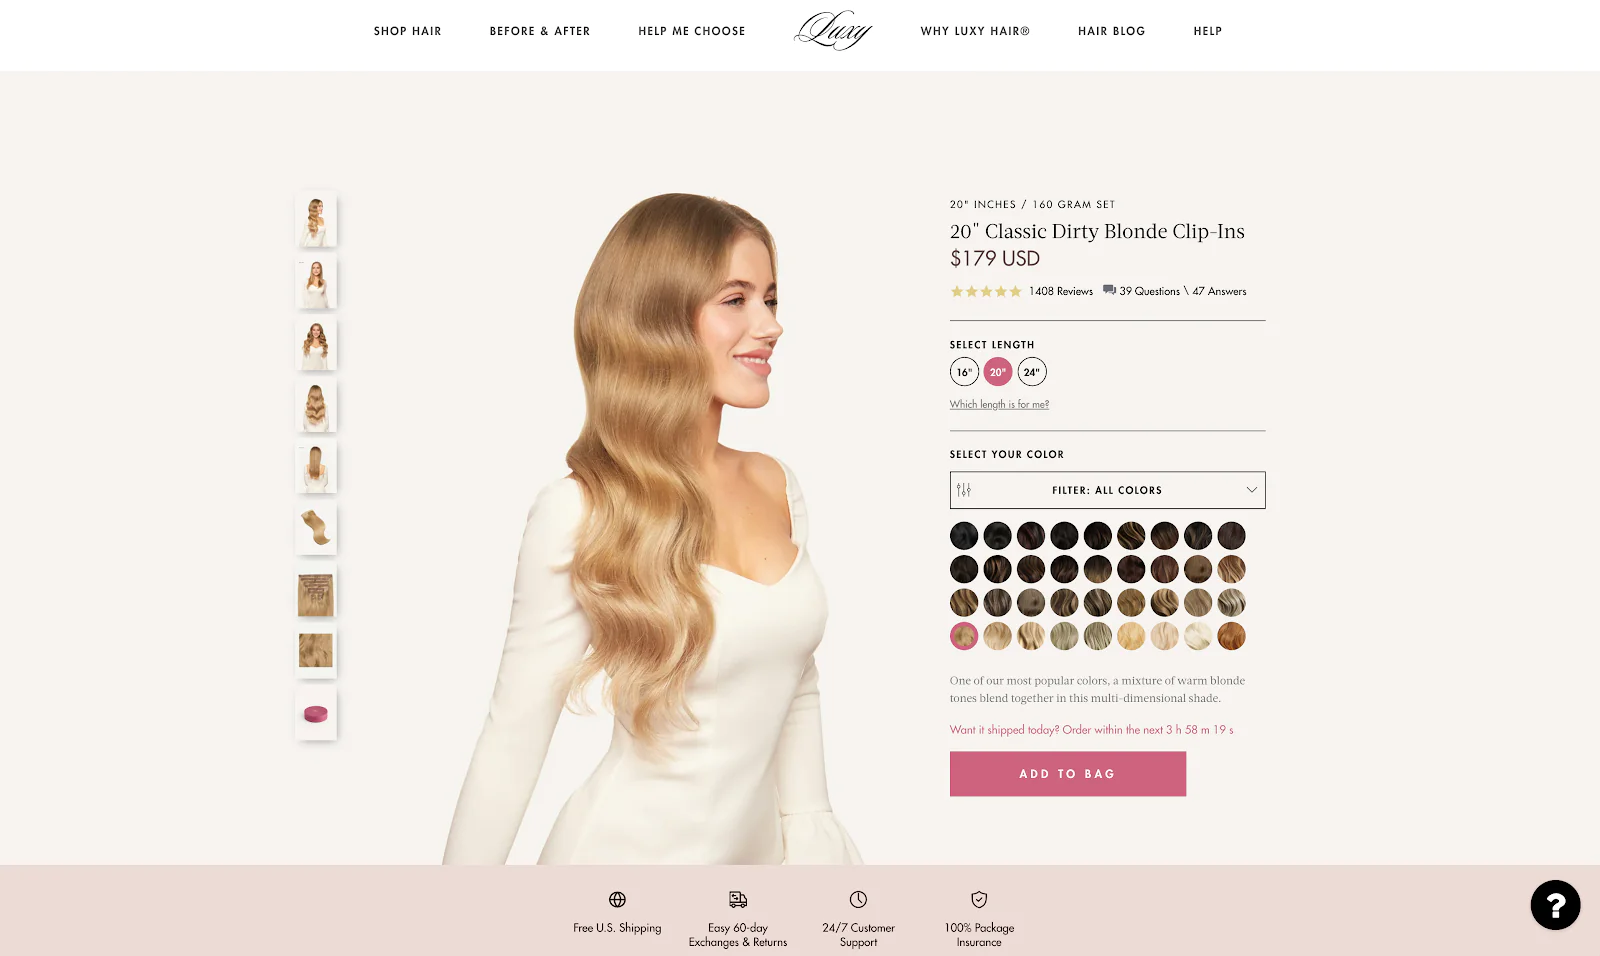 image of product detail page